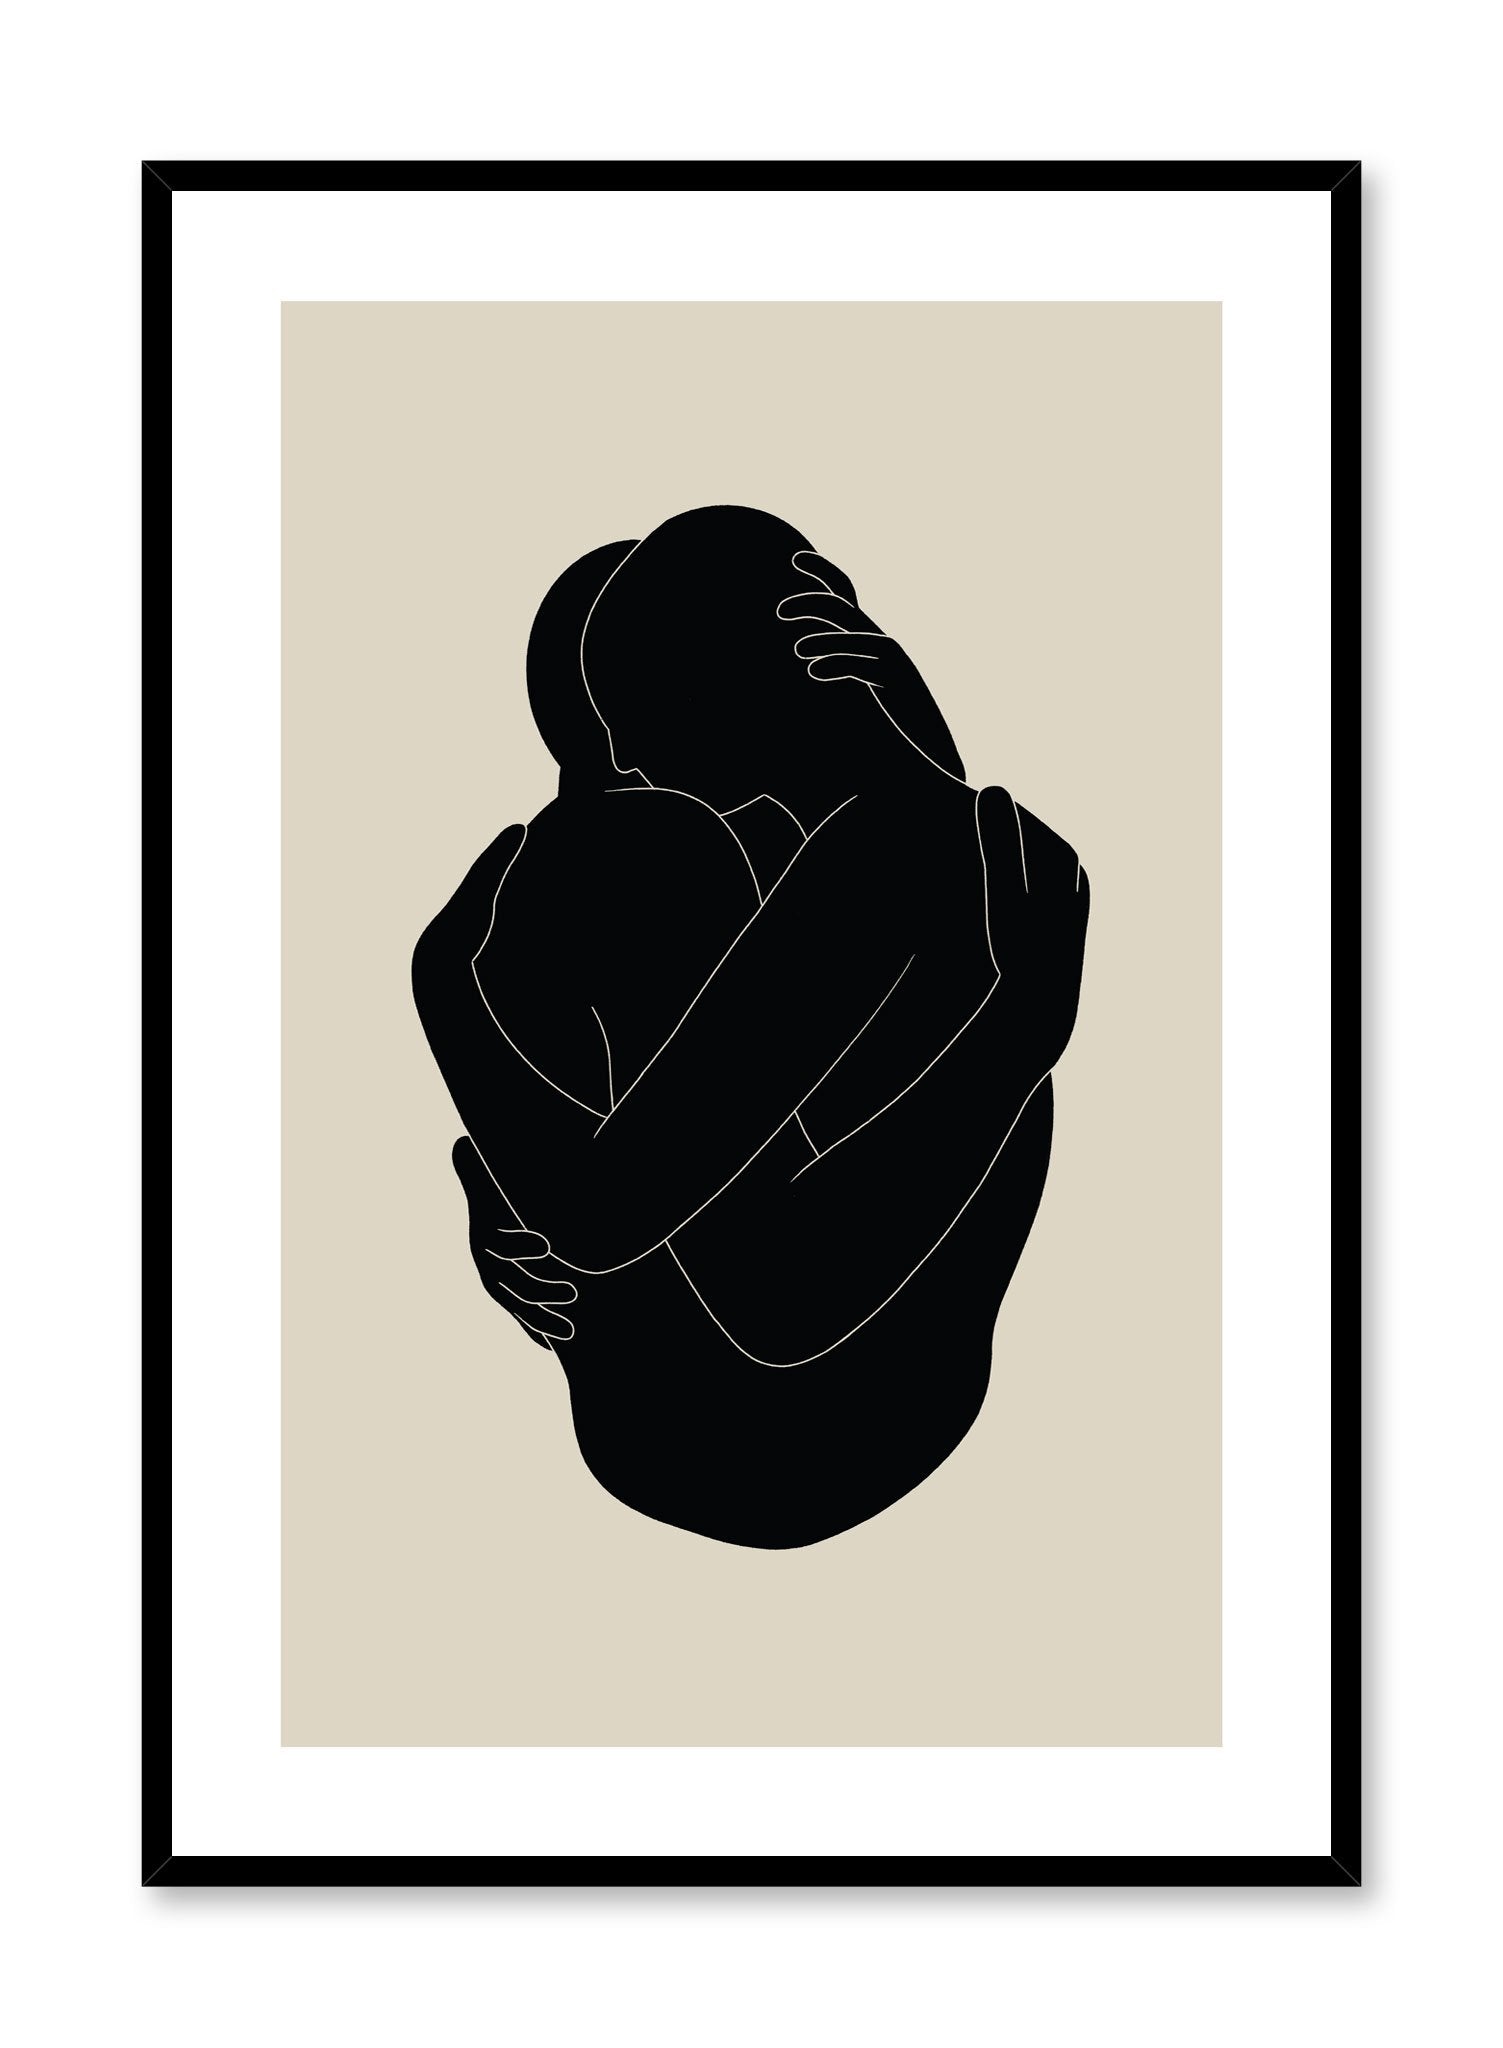 Minimalist design poster by Opposite Wall with abstract embracing couple